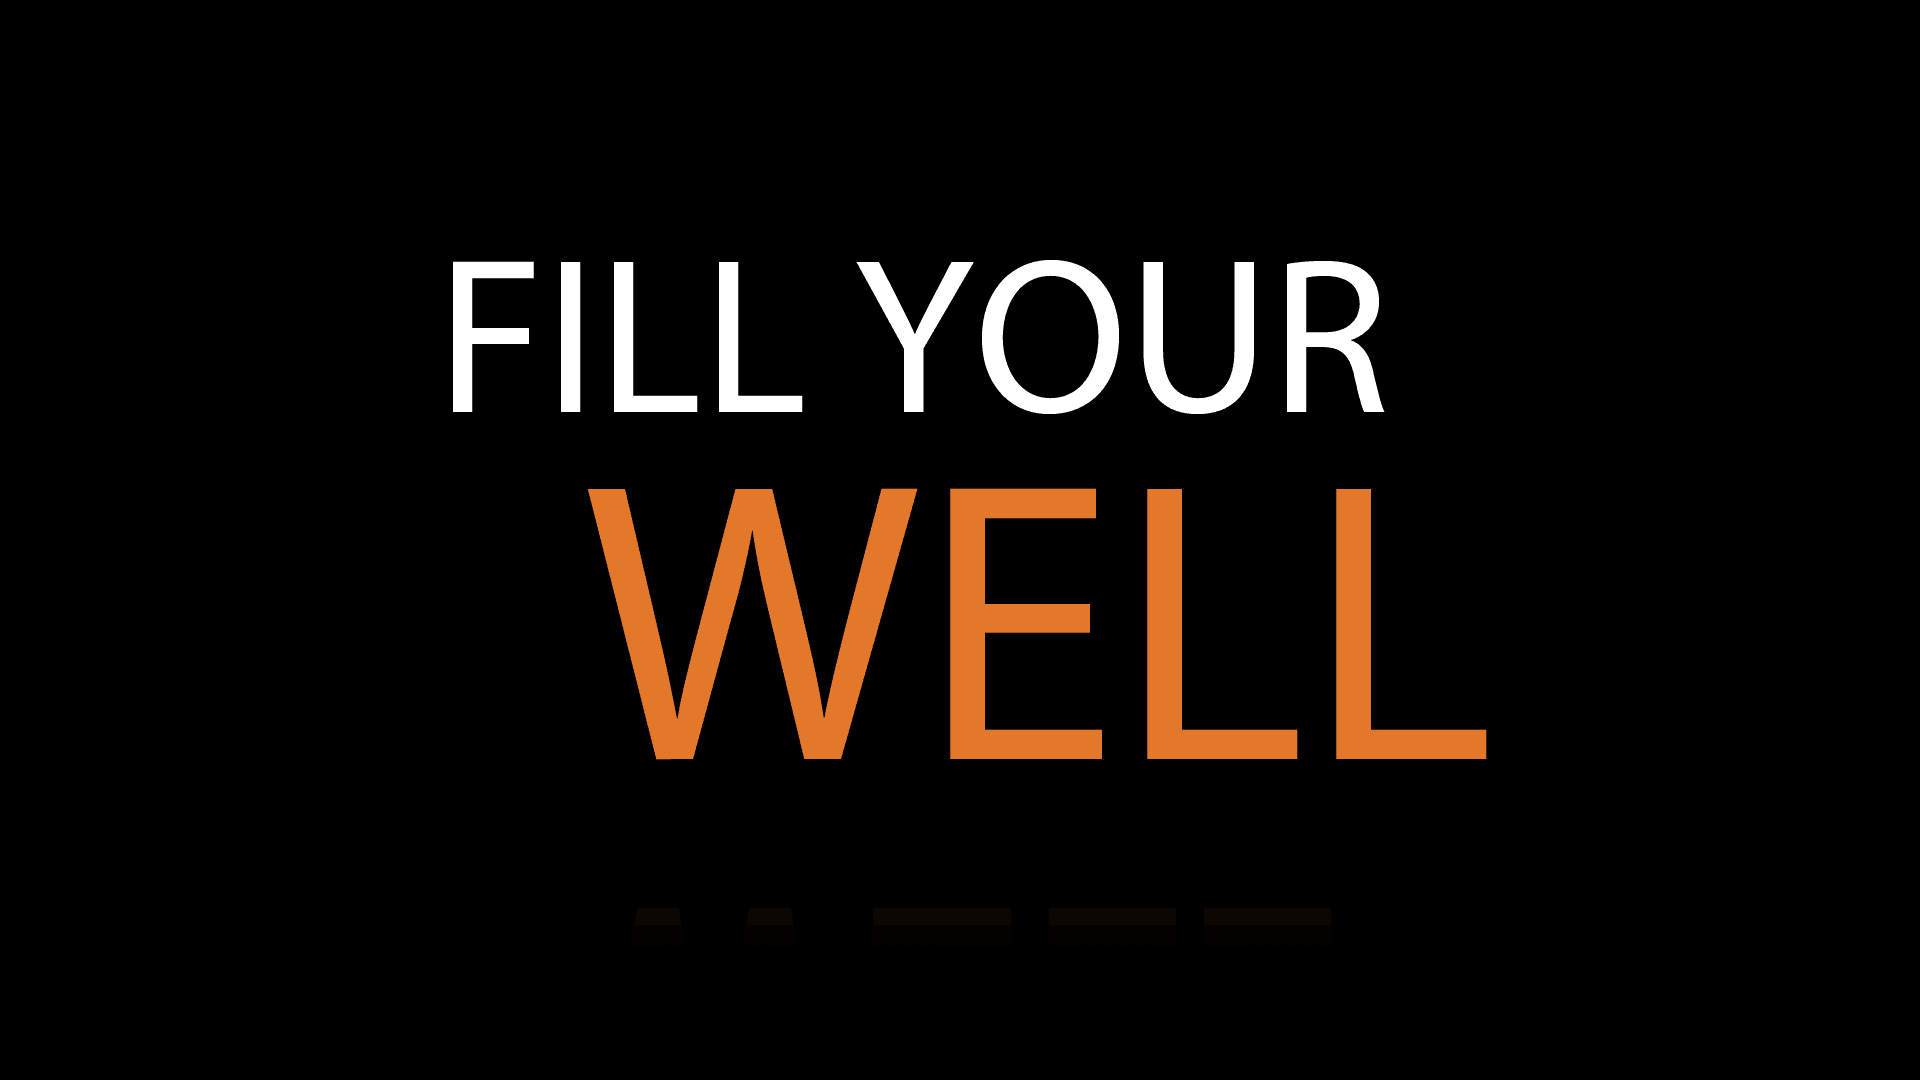 fill your well to overcome boredom and spark creativity - todd henry